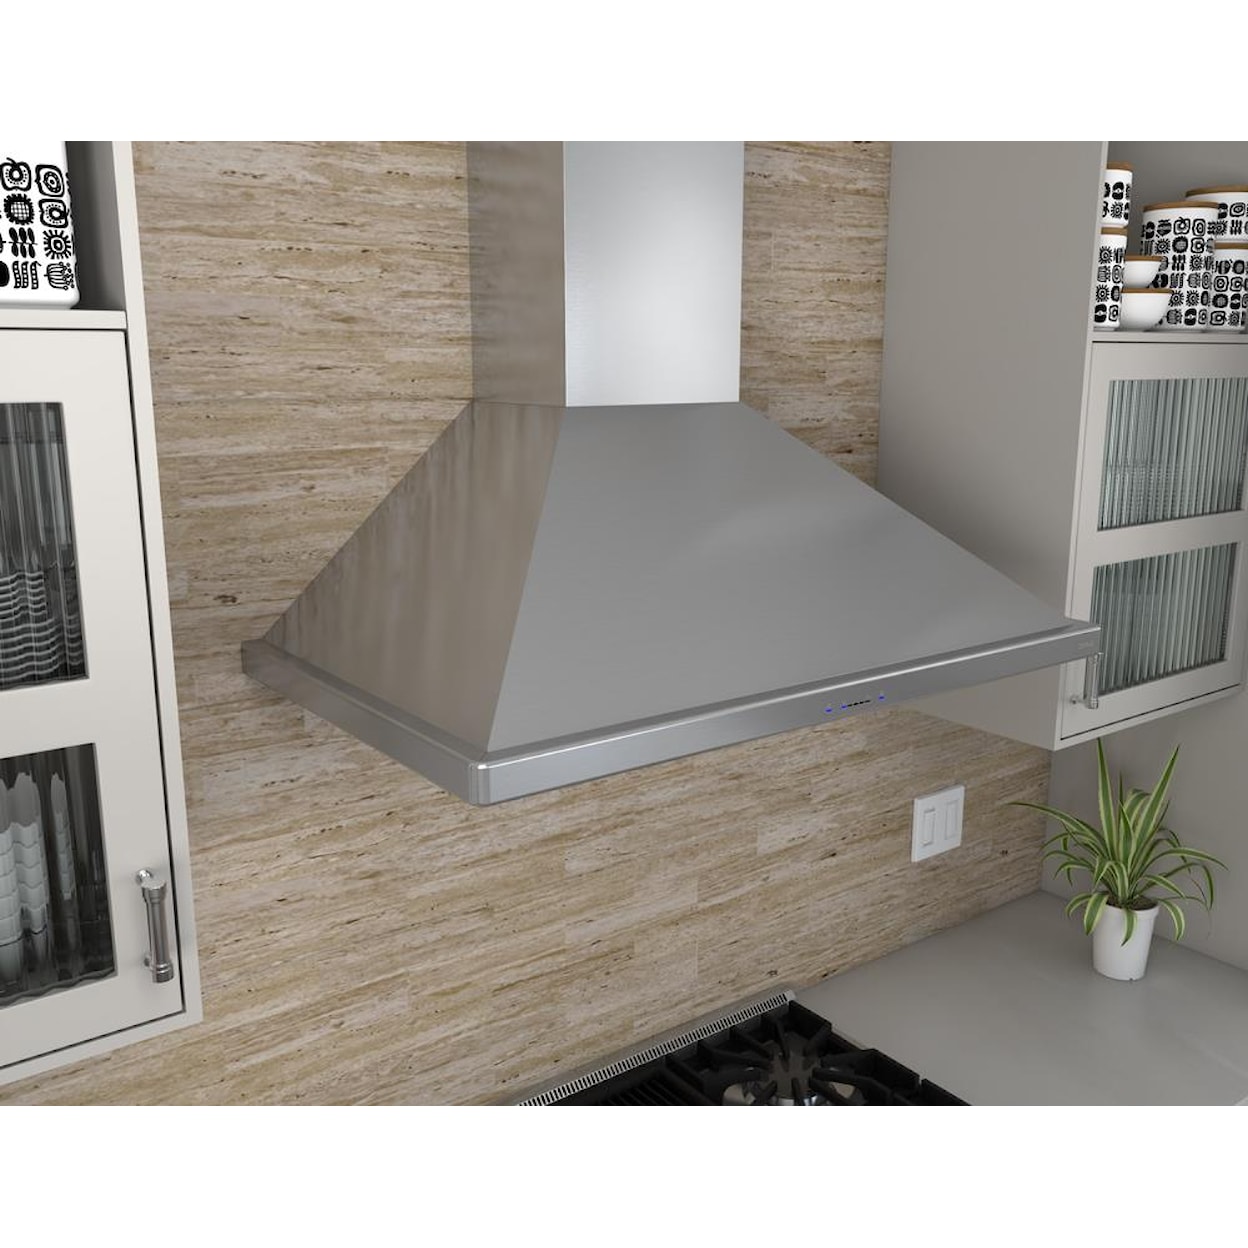 Zephyr Essentials Collection- Chimney Wall and Downdraft 30" Wall Mount Chimney Range Hood